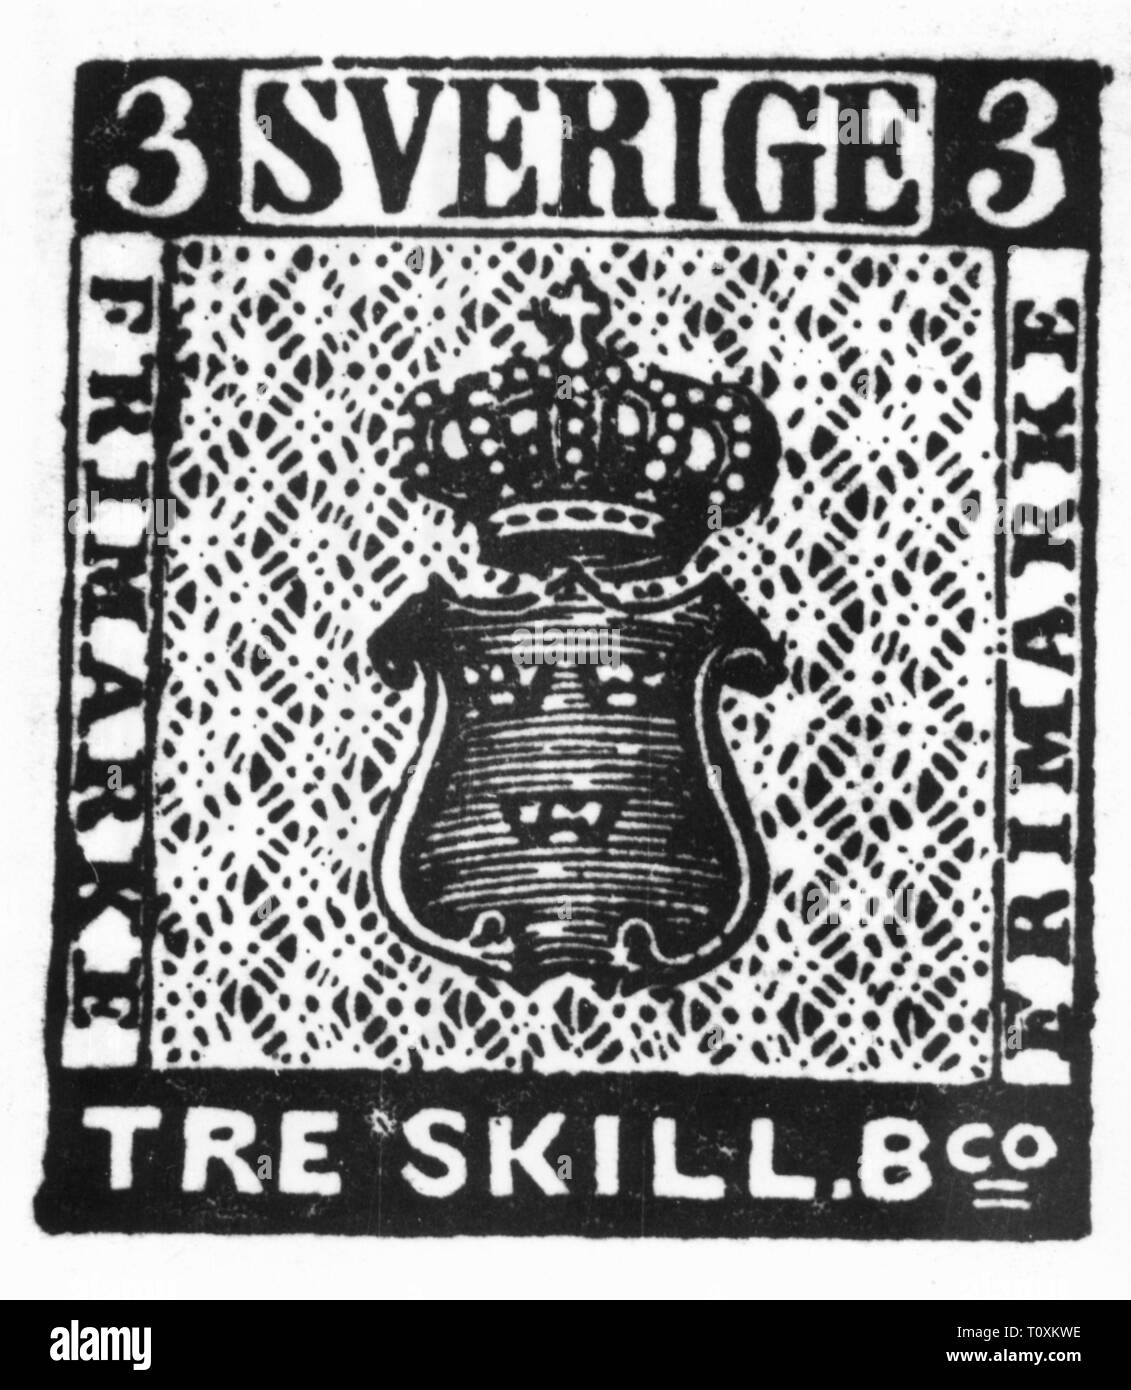 mail, postage stamps, Sweden, Tre Skilling Banco, date of issue: 1855,  three, 3, shilling, bob, shillings, bobs, coat of arms, kingdom, realm,  kingdoms, crown, crowns, , 19th century, mail, post, postage stamps,